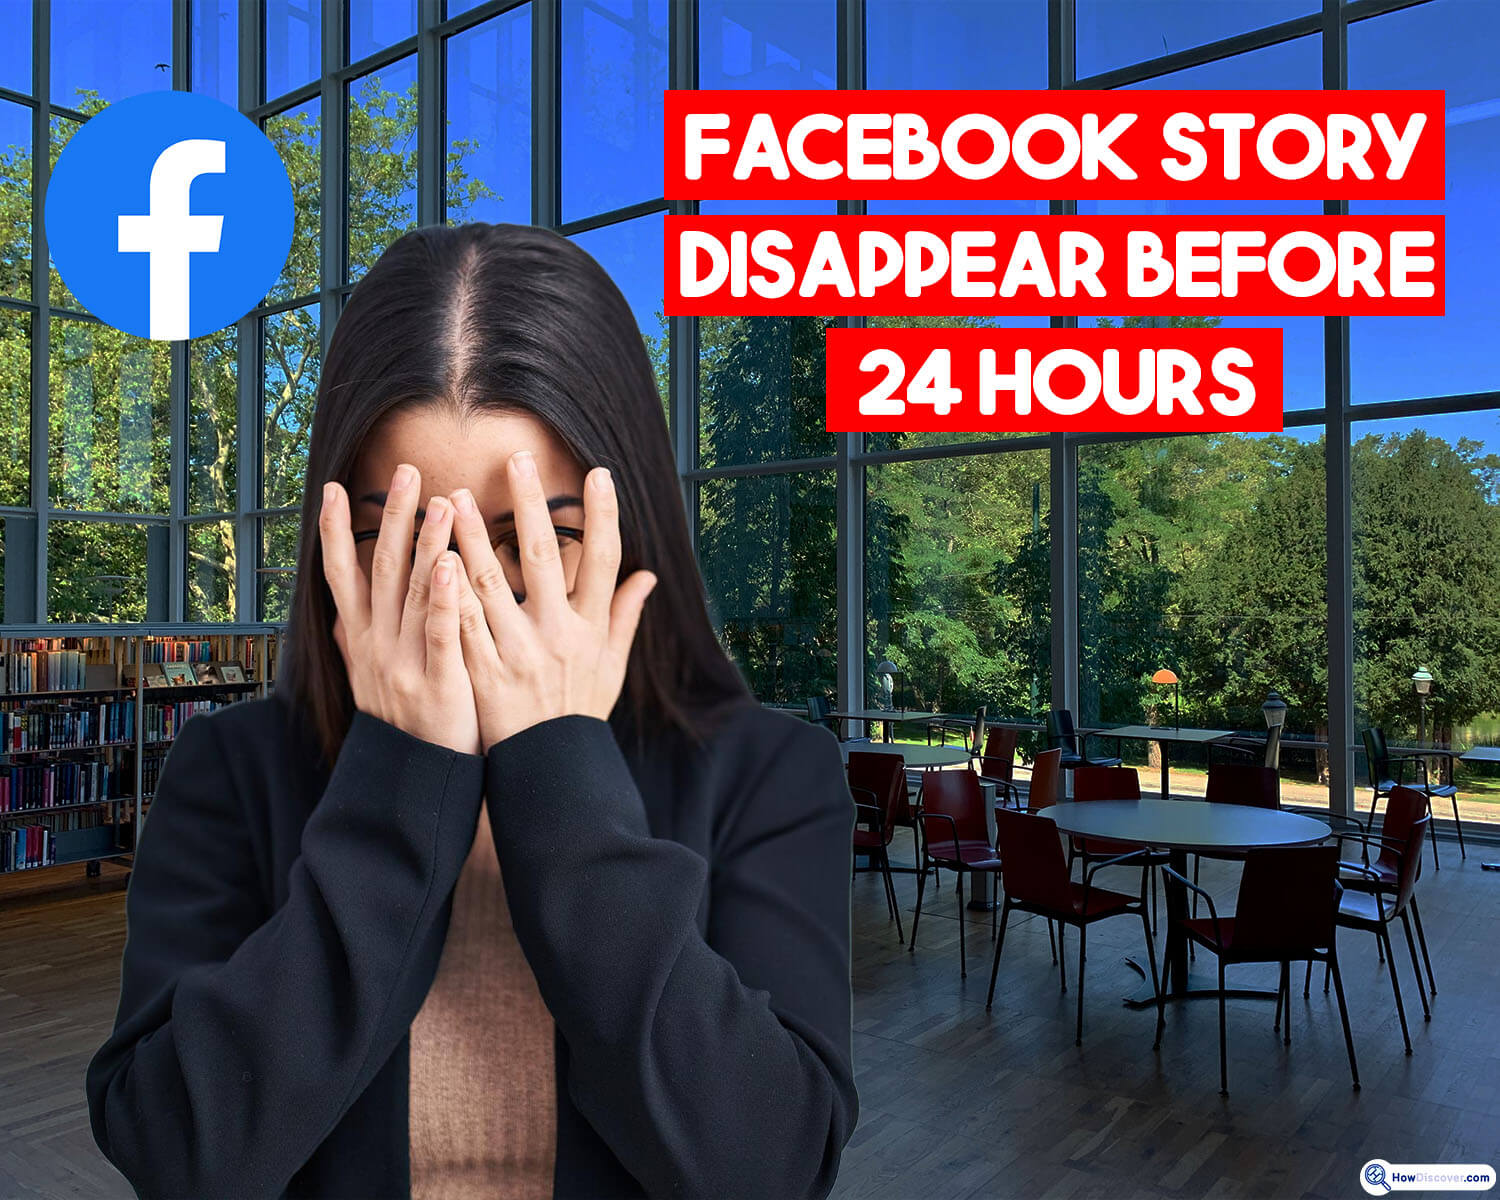 Why Did My Facebook Story Disappear Before 24 Hours?